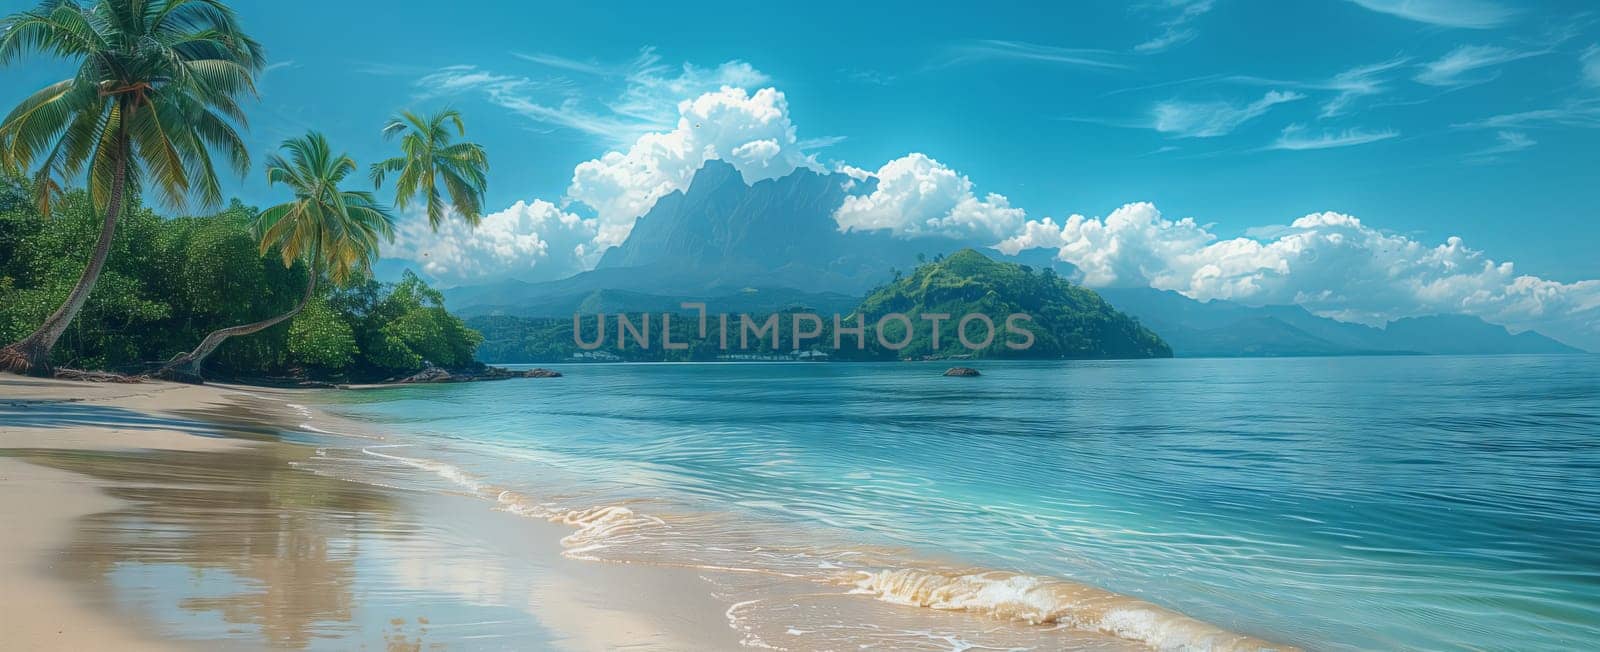 a tropical beach with palm trees and a mountain in the background by richwolf